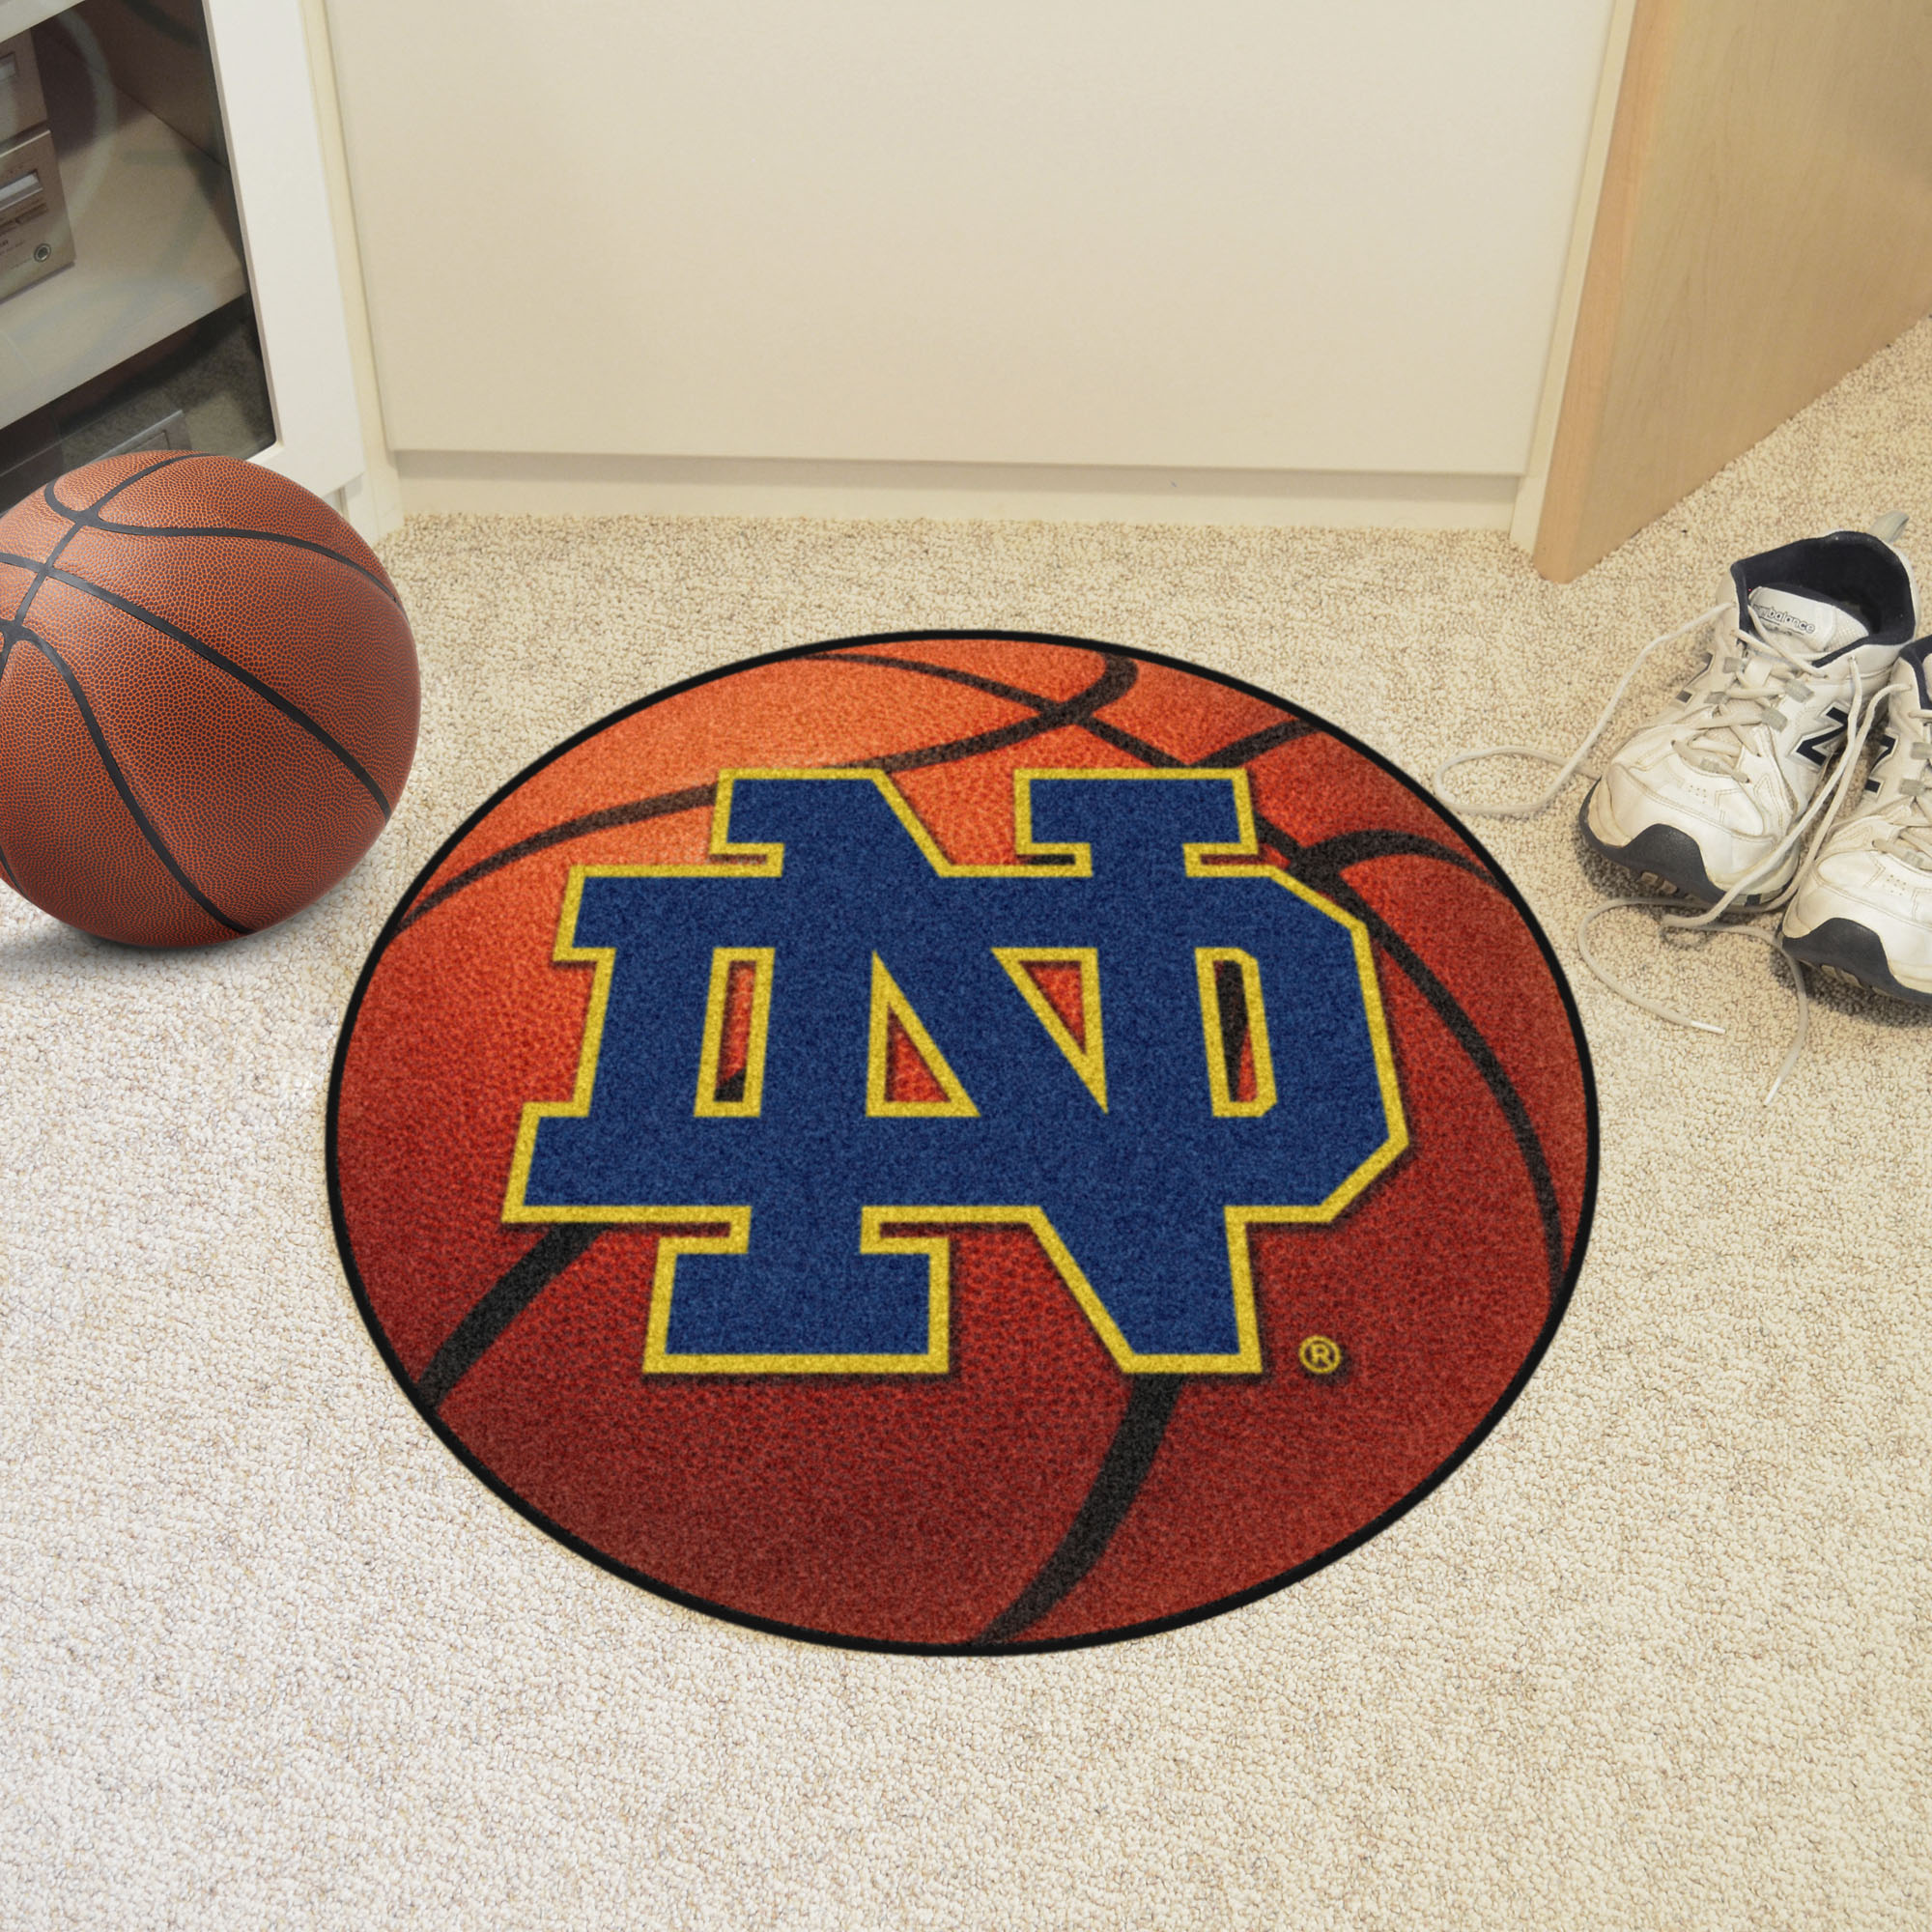 University of Notre Dame Ball Shaped Area Rugs (Ball Shaped Area Rugs: Basketball)